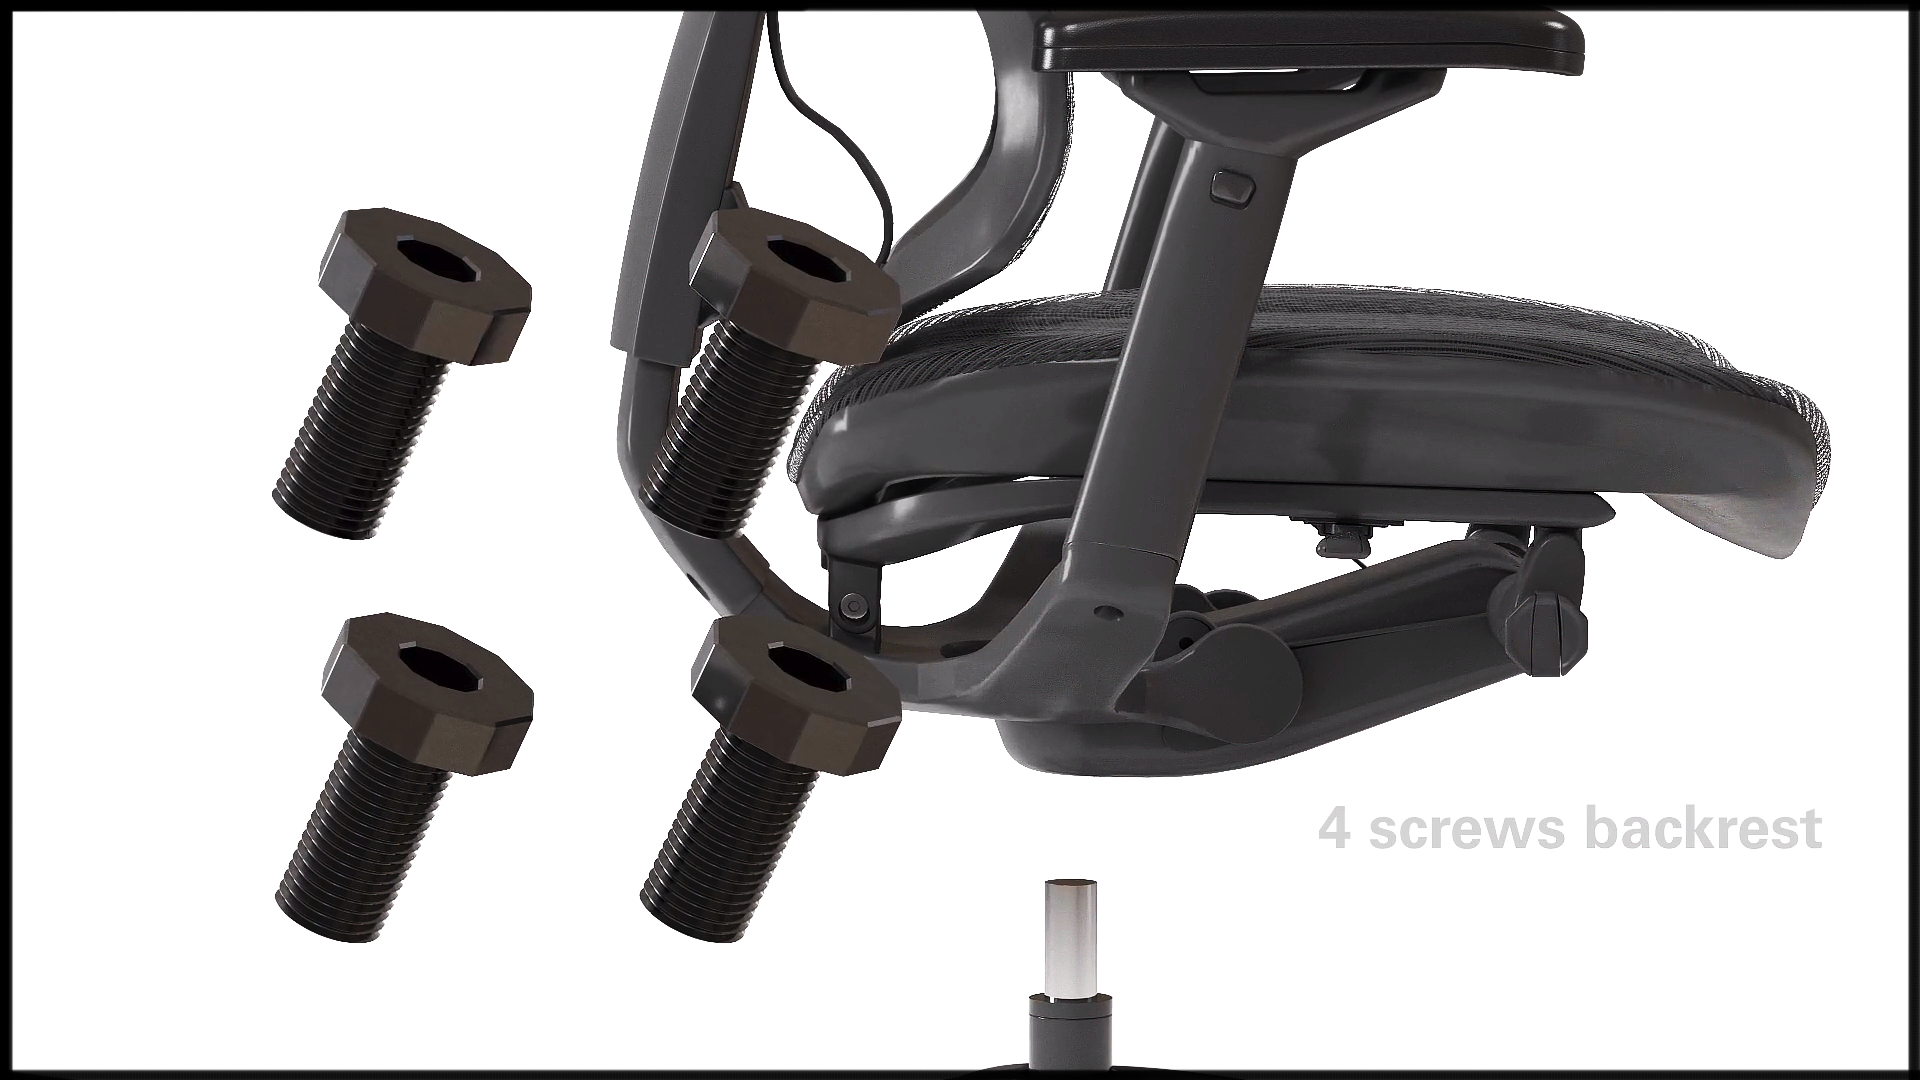 This is a 3D rendered image from Trinity's 3D product animation demonstrating the assembly and operation of the the iOO Office Chair. This shot provides imagery of the four screws which are inserted into the backrest to hold it in place. A close up shot of the screws are displayed in this still shot, while the office chair is displayed behind them. This is followed by the placement of each screw into the backrest.